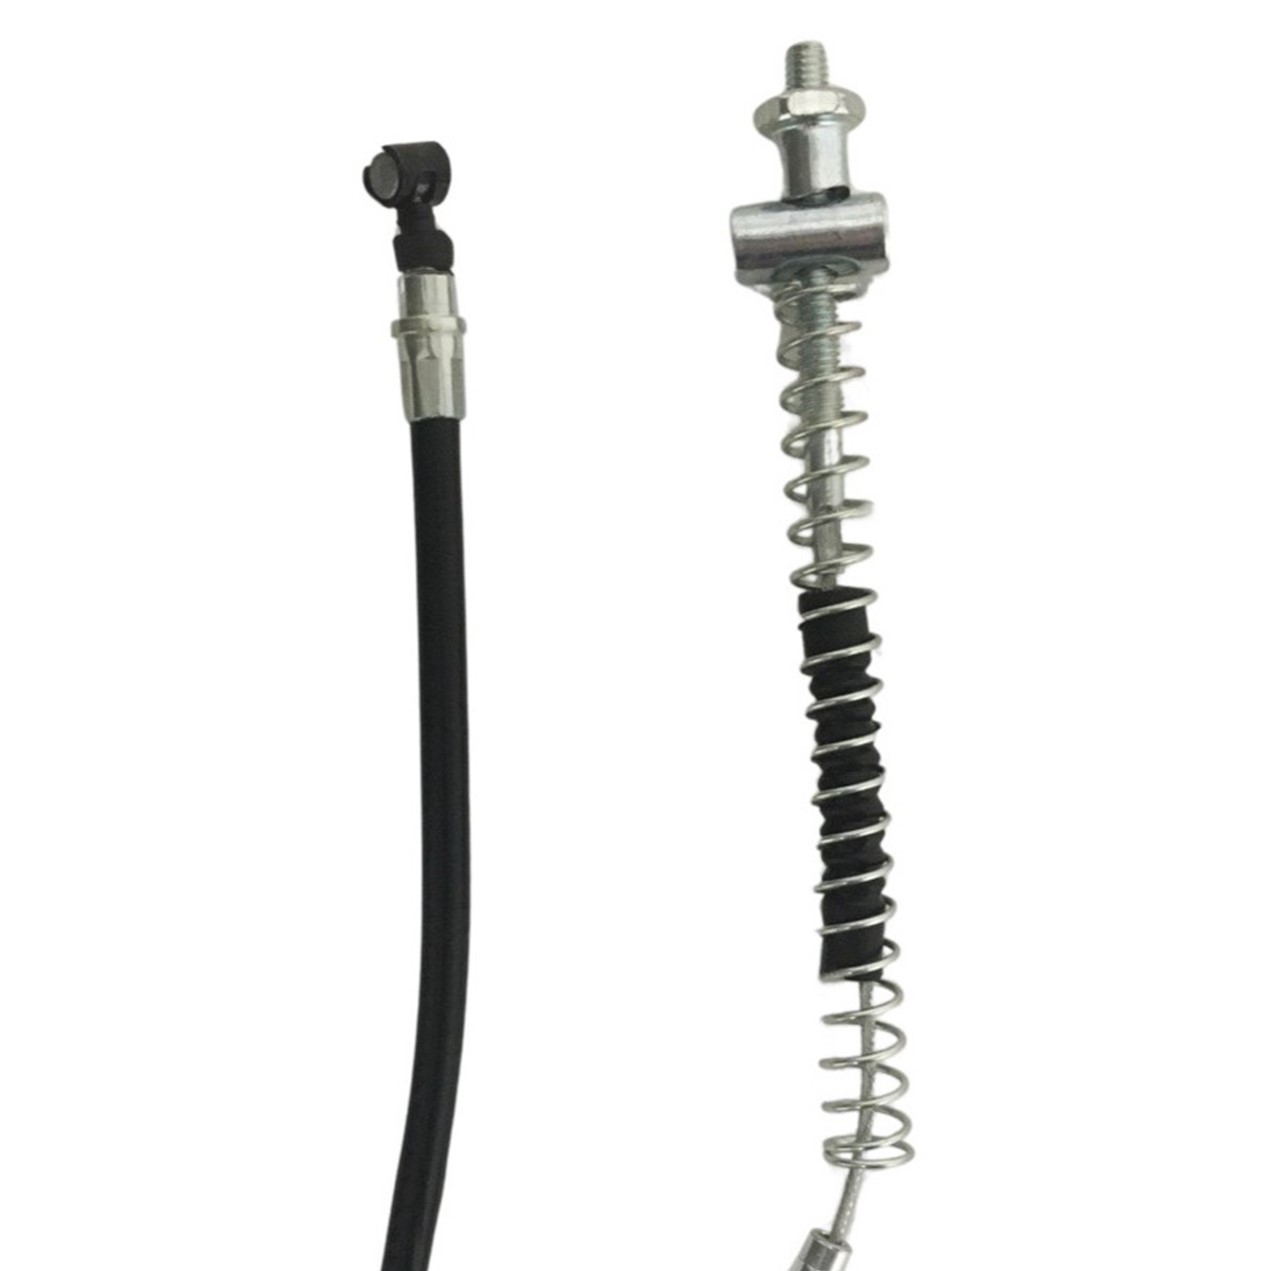 Rear Brake Cable Fits E-Ton Racsal, Viper Jr. RXL40 ATVs + More Out=42"/Inner Wire= 49.50"